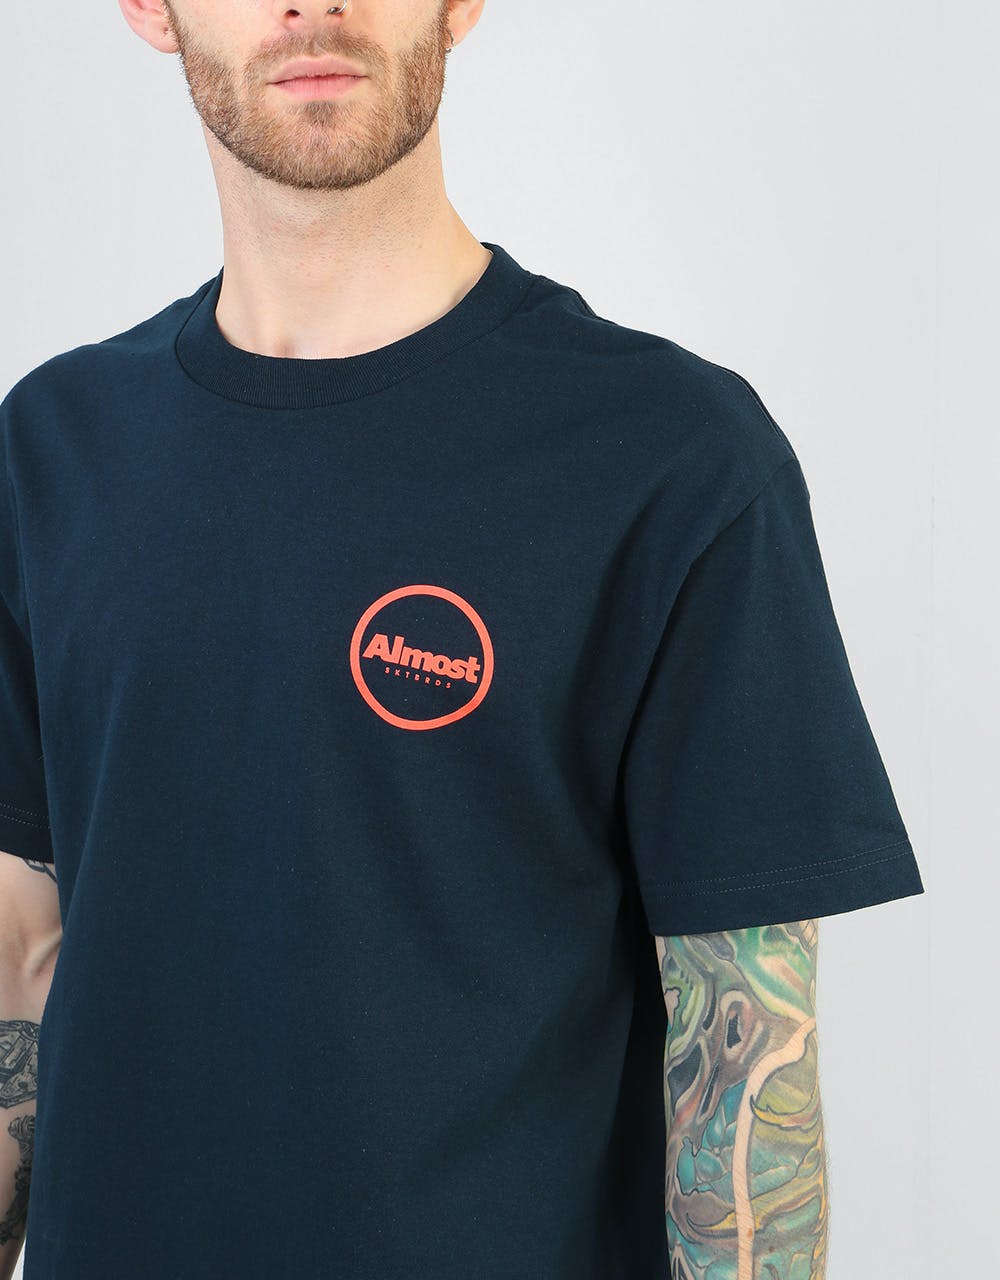 Almost Apex T-Shirt - Navy